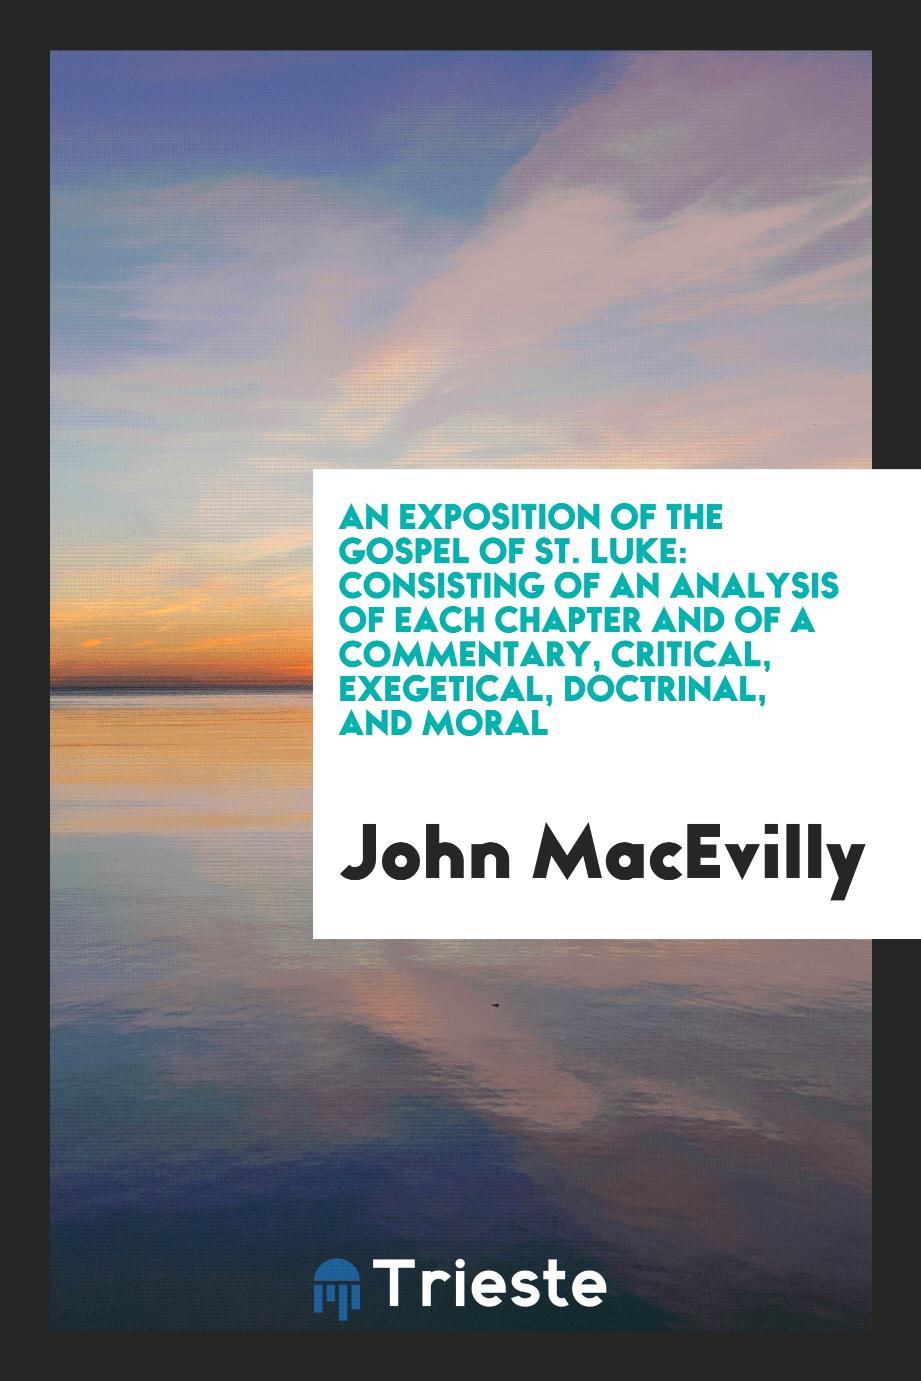 An exposition of the Gospel of St. Luke: consisting of an analysis of each chapter and of a commentary, critical, exegetical, doctrinal, and moral